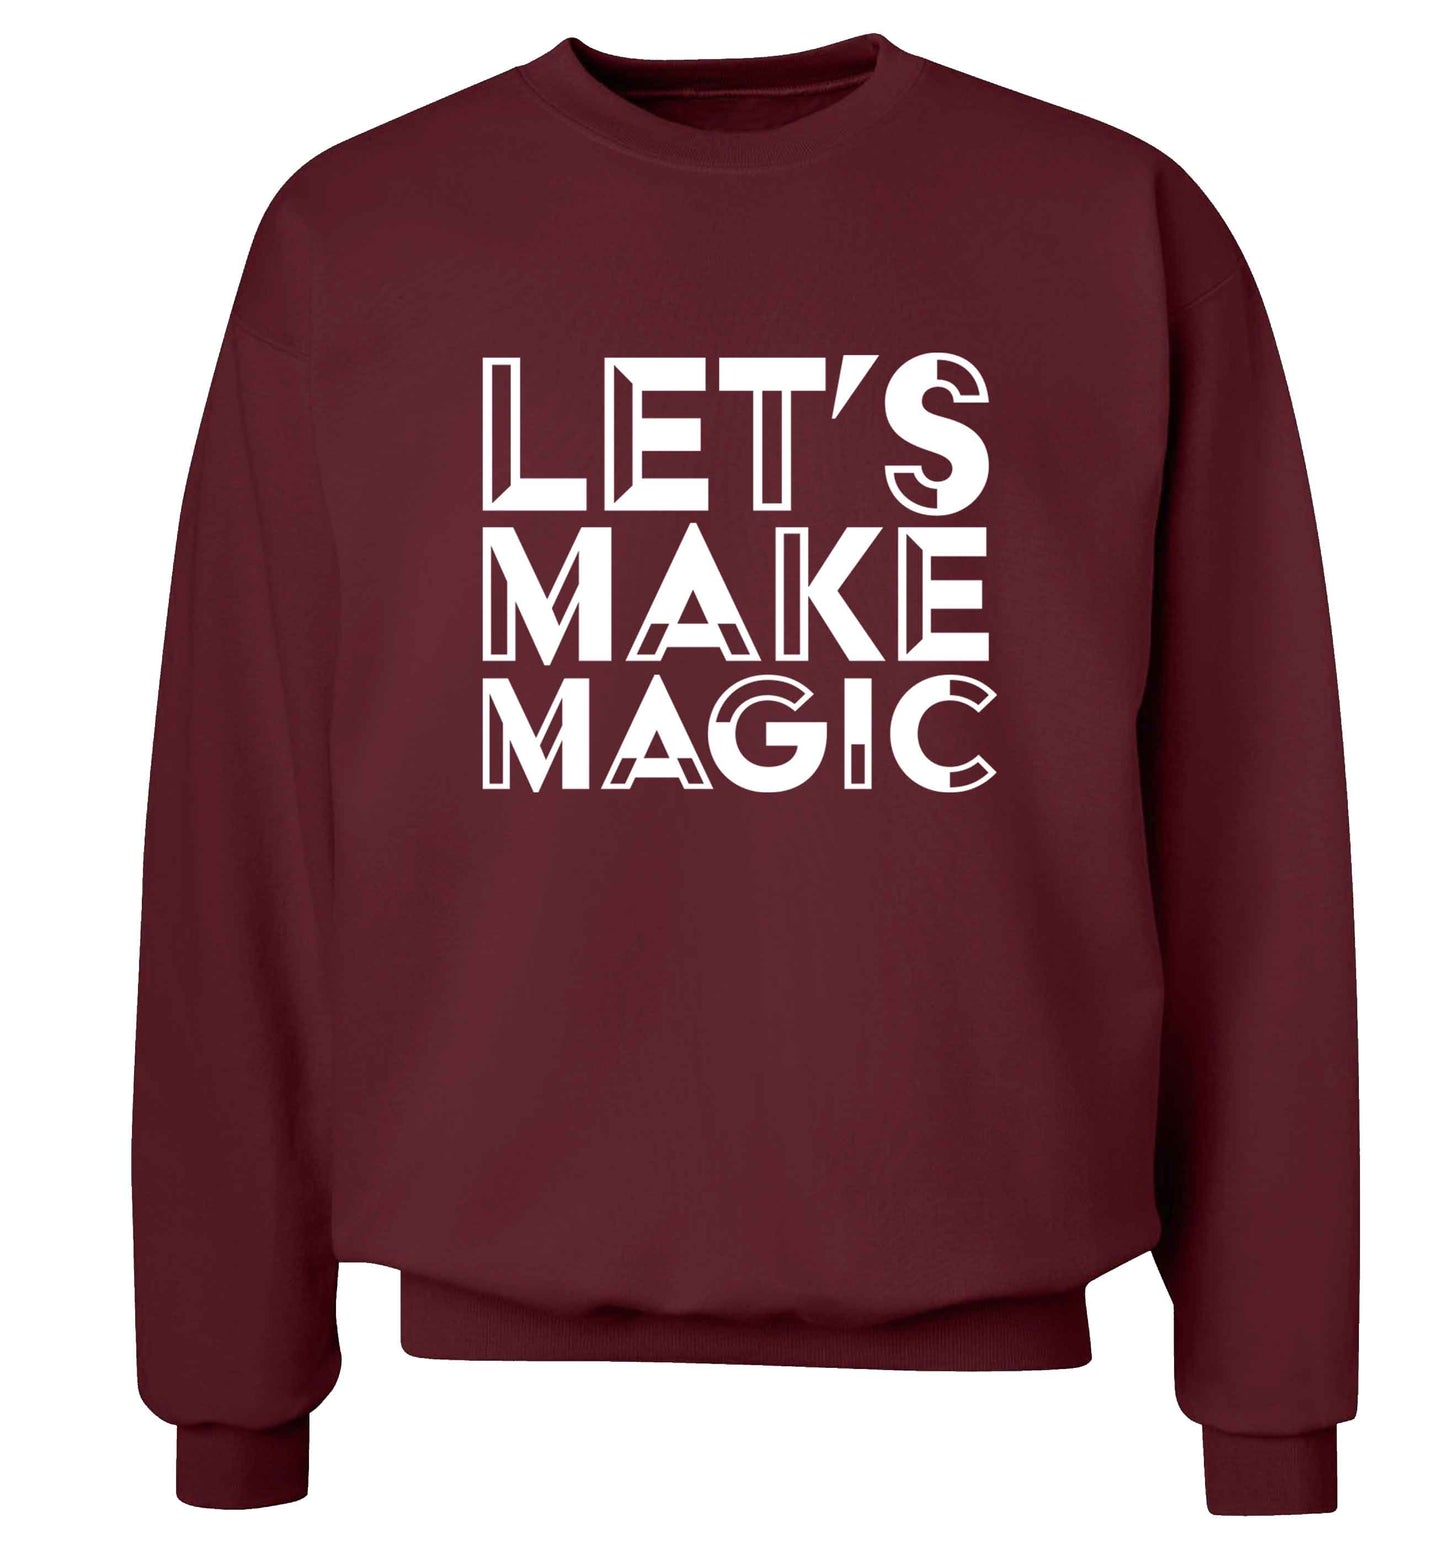 Let's make magic adult's unisex maroon sweater 2XL